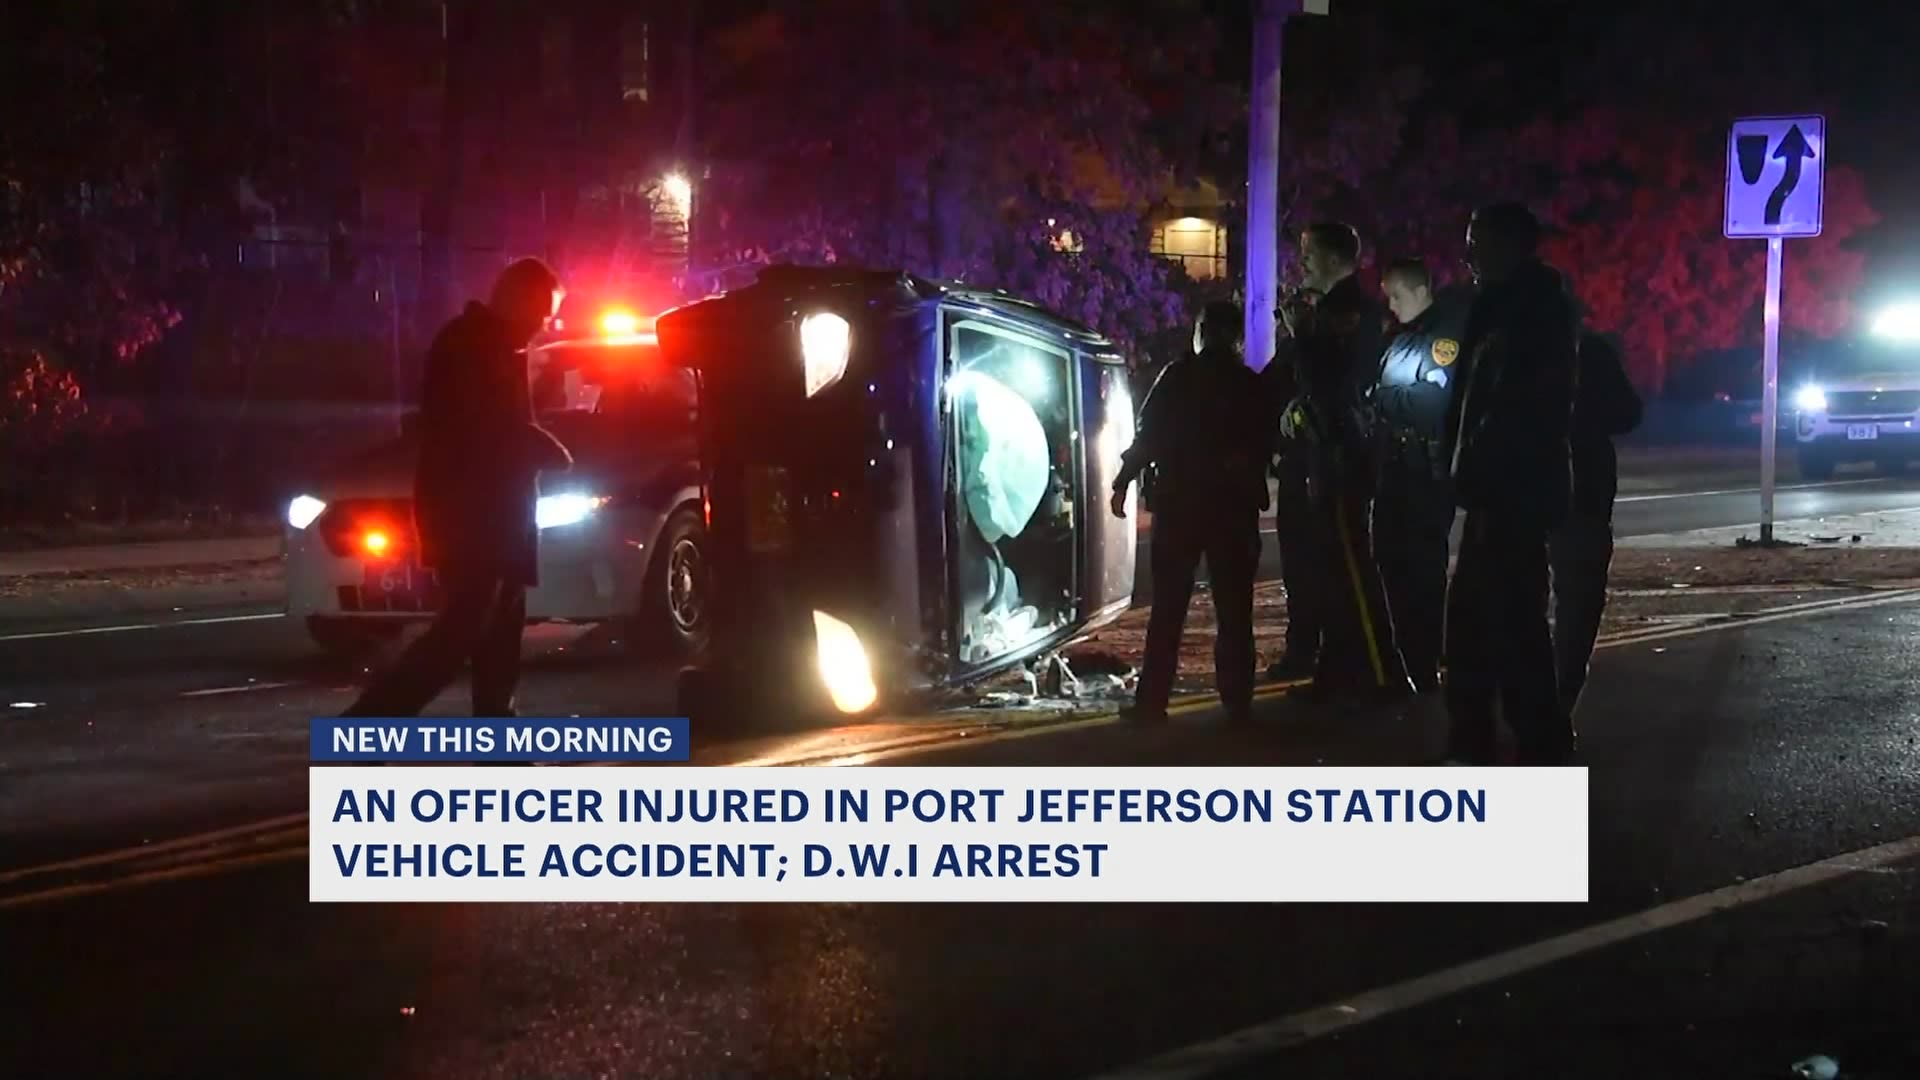 Police Woman Charged With Dwi After Crashing Into Patrol Car With Officer Inside In Port